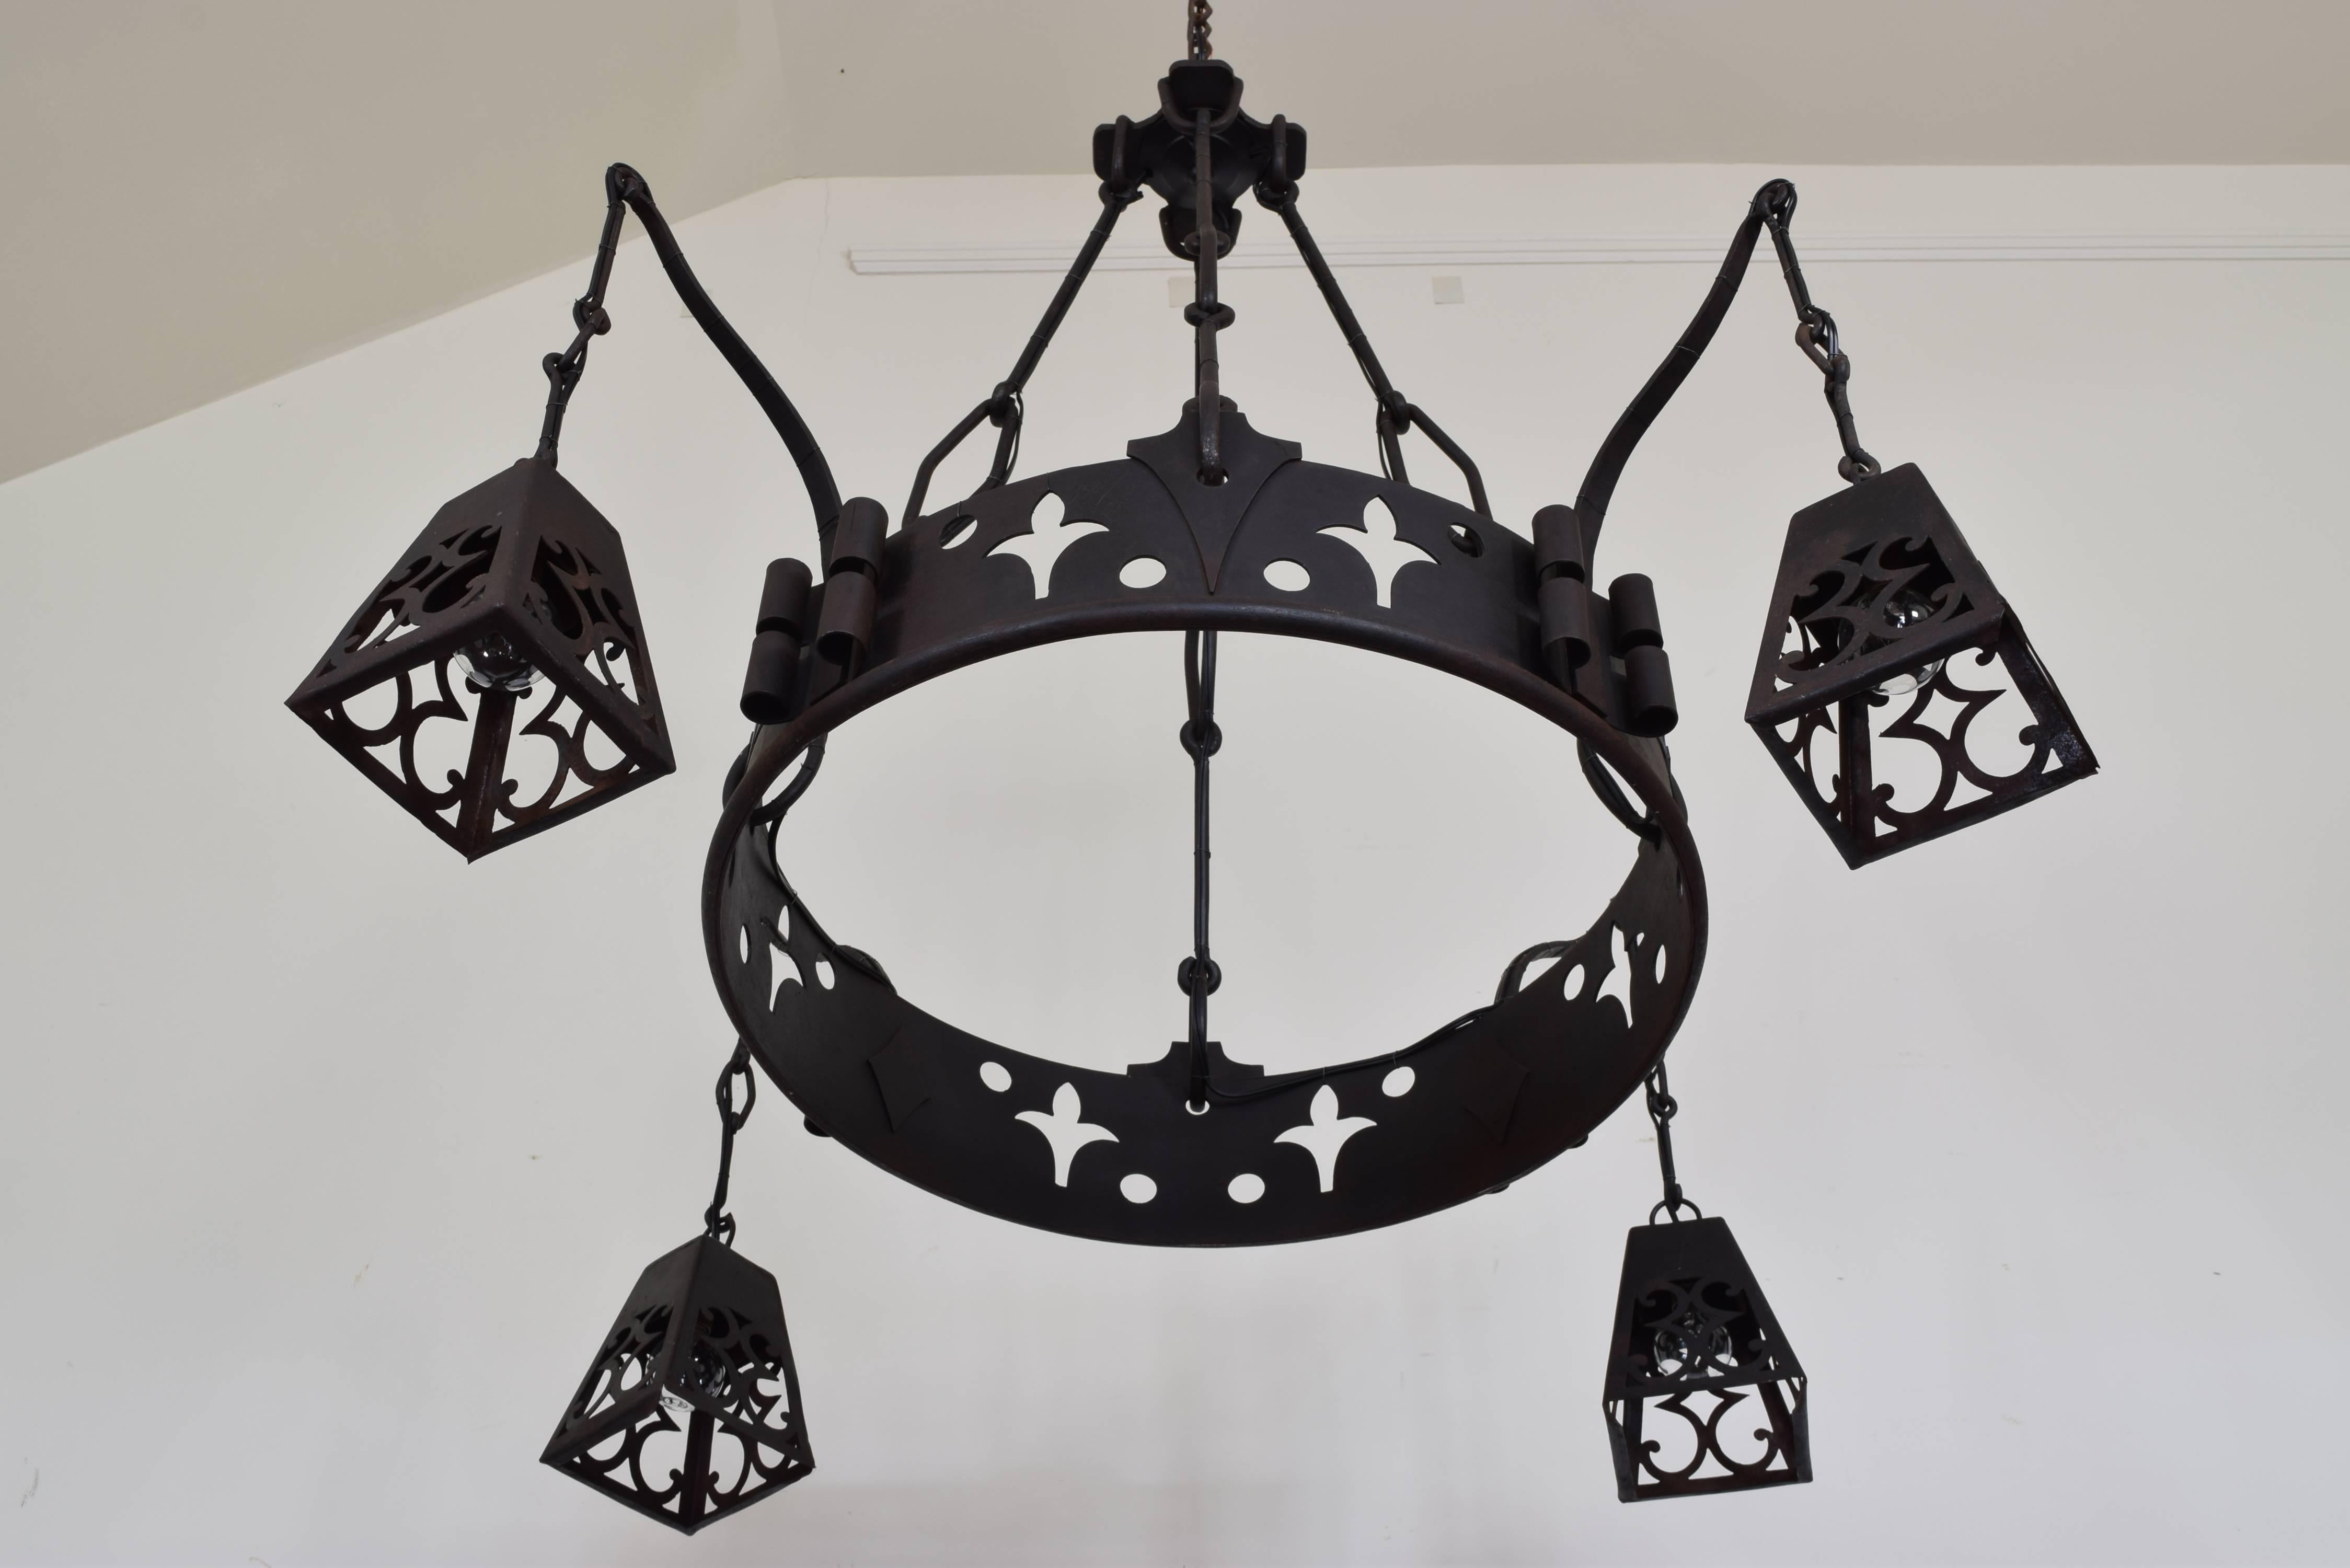 UL wired, beautifully wrought and cast iron pierced ring-form chandelier hanging from shaped rods, the lanterns with pierced decorations, signed J.Guillot from Panissieres, Loire, France.